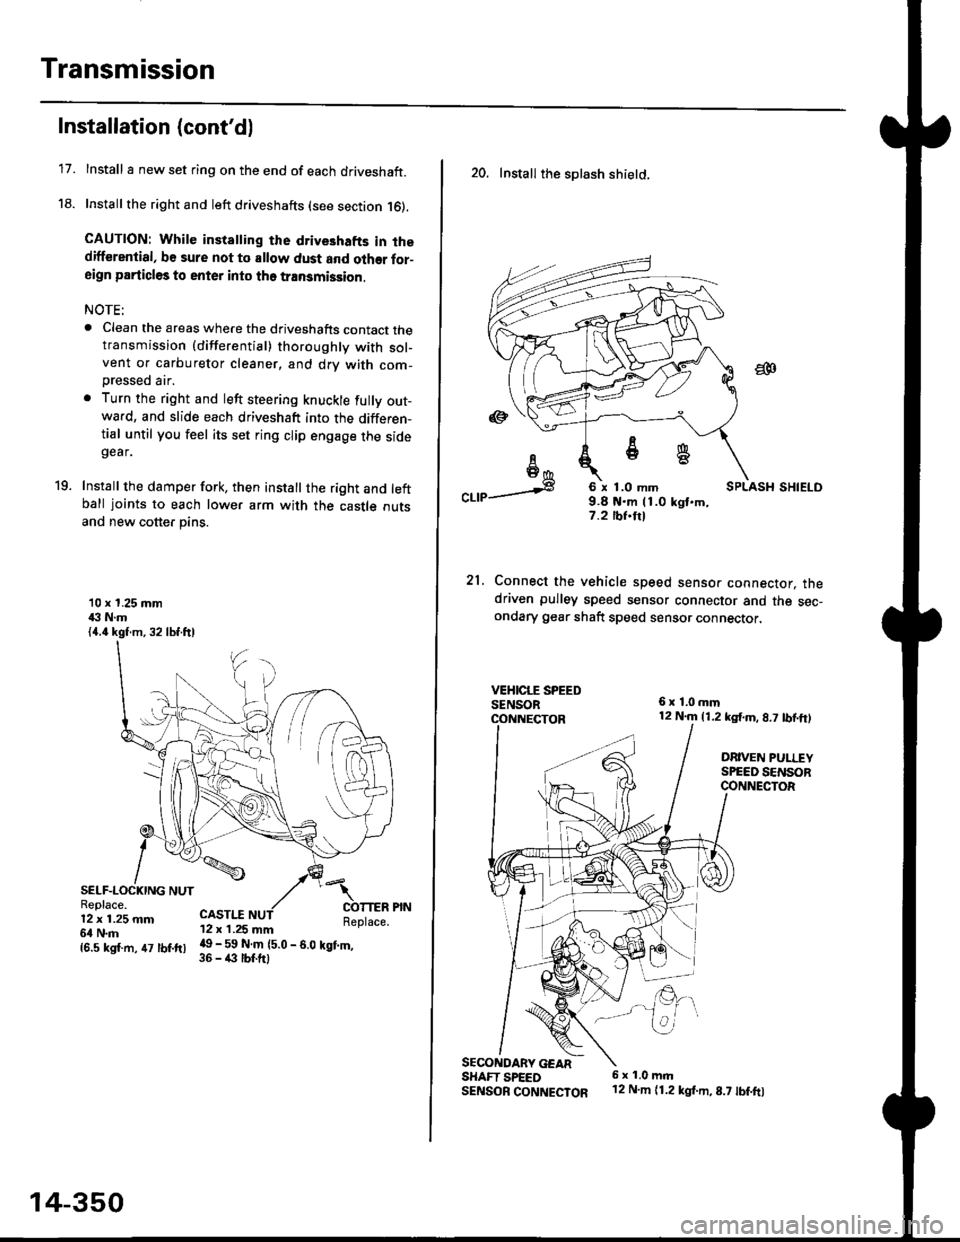 HONDA CIVIC 2000 6.G Workshop Manual Transmission
17.
Installation (contd)
Install I new set ring on the end of each driveshaft.
Install the right and left driveshafts (see section 16).
CAUTION: While instatling the drive3hafts in thedi